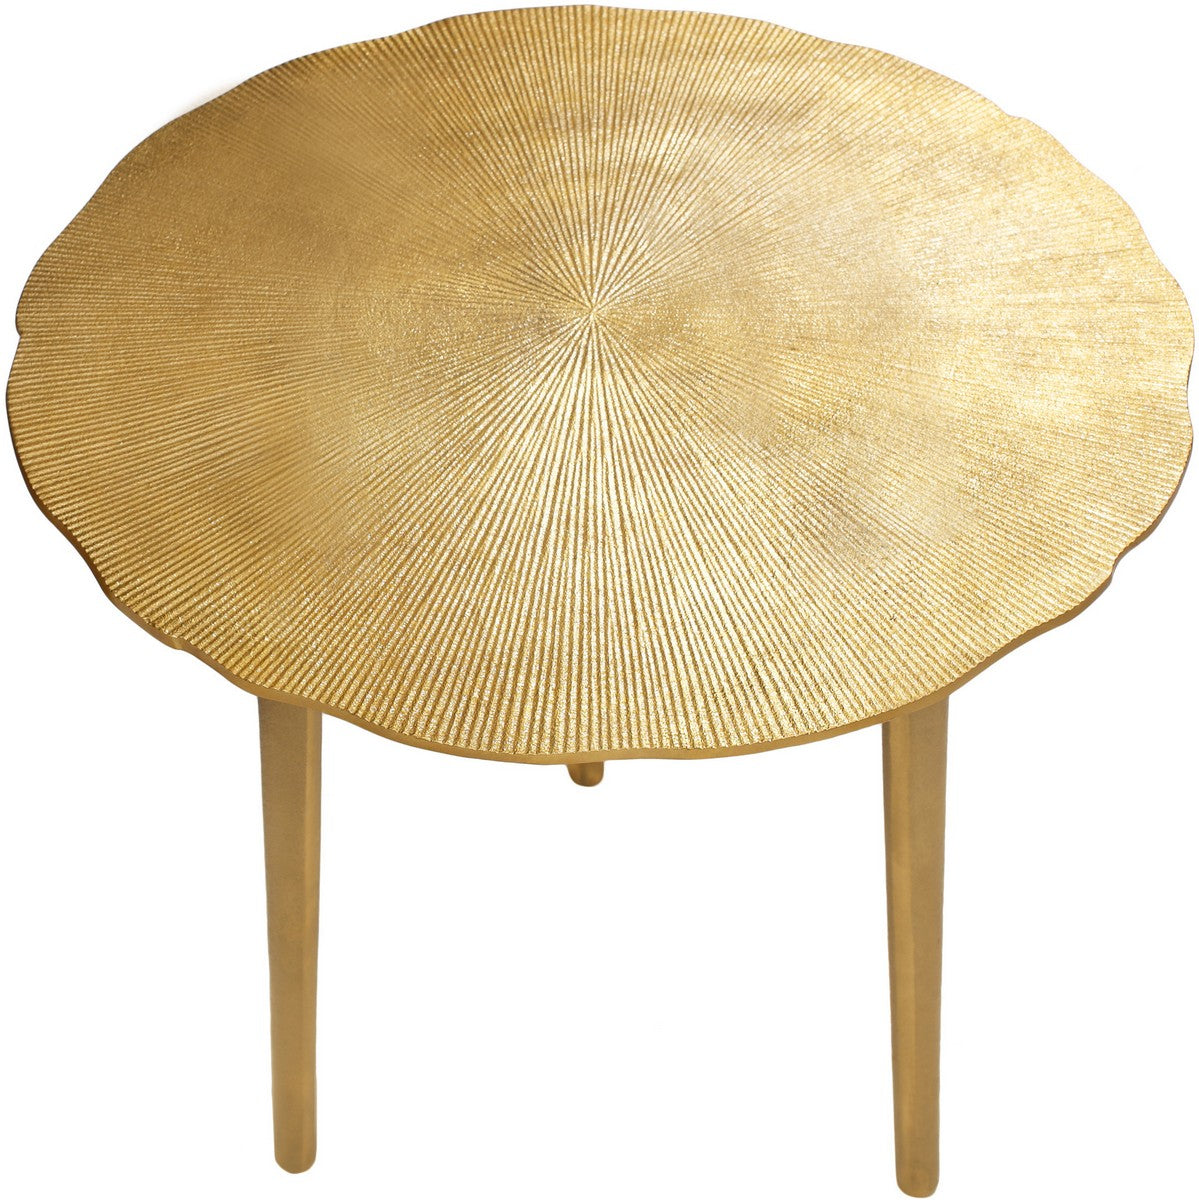 Meridian Furniture Rohan Gold End Table